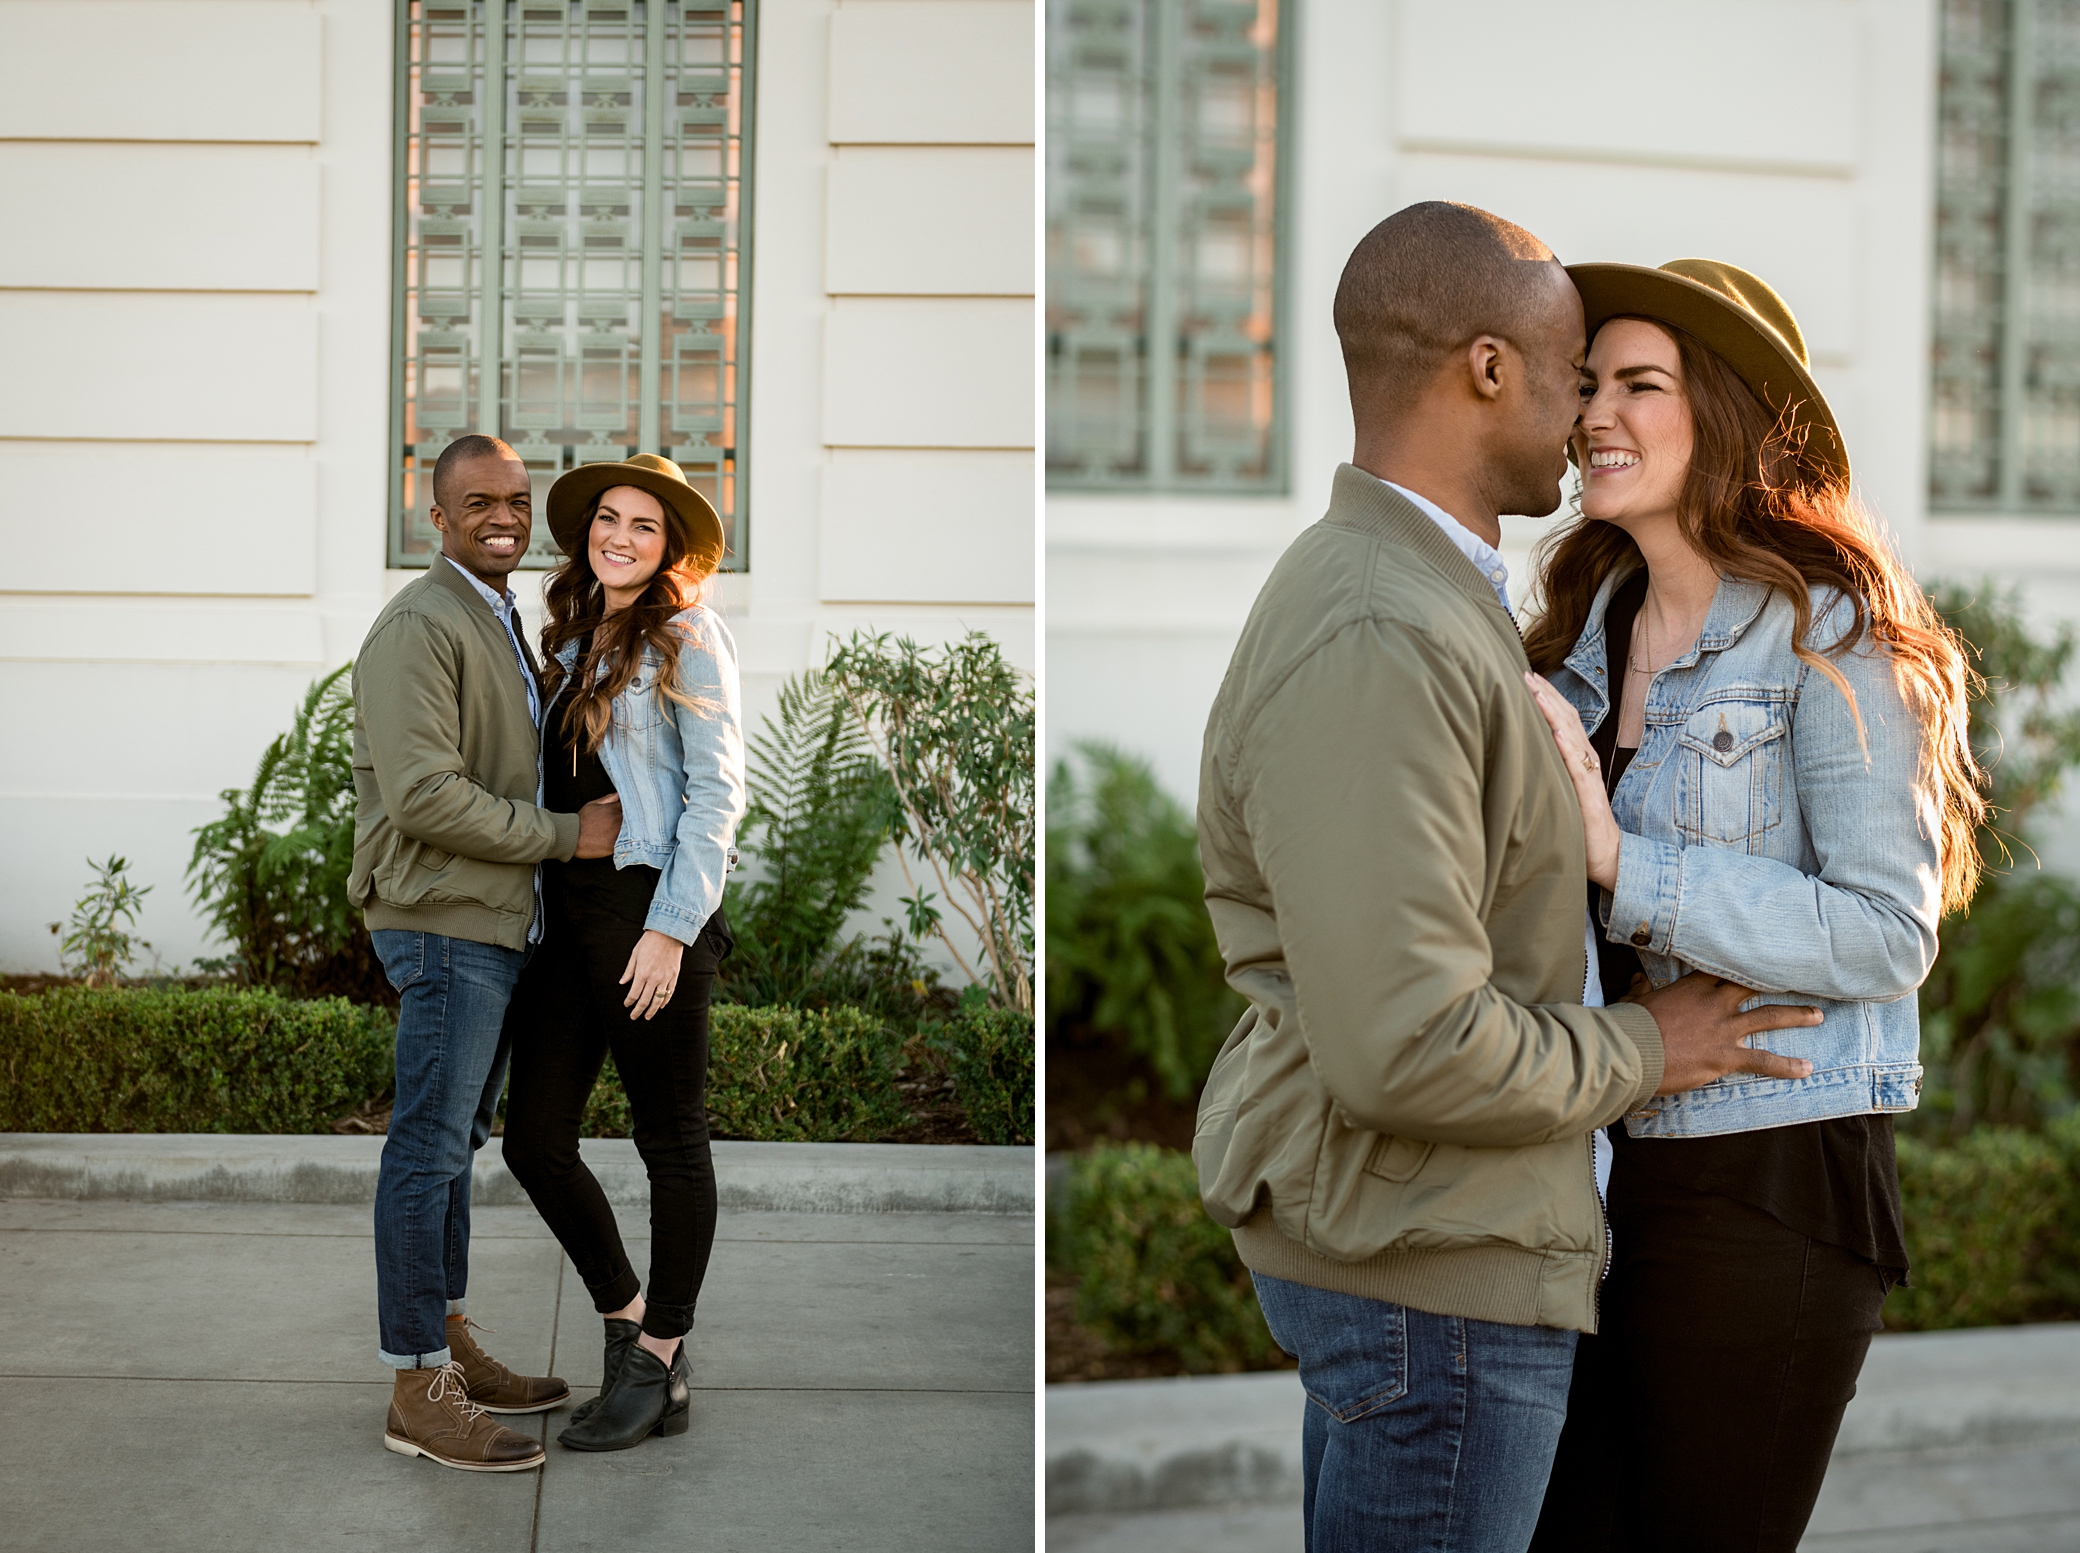 Griffith Observatory Engagement Photos in Los Angeles during winter.